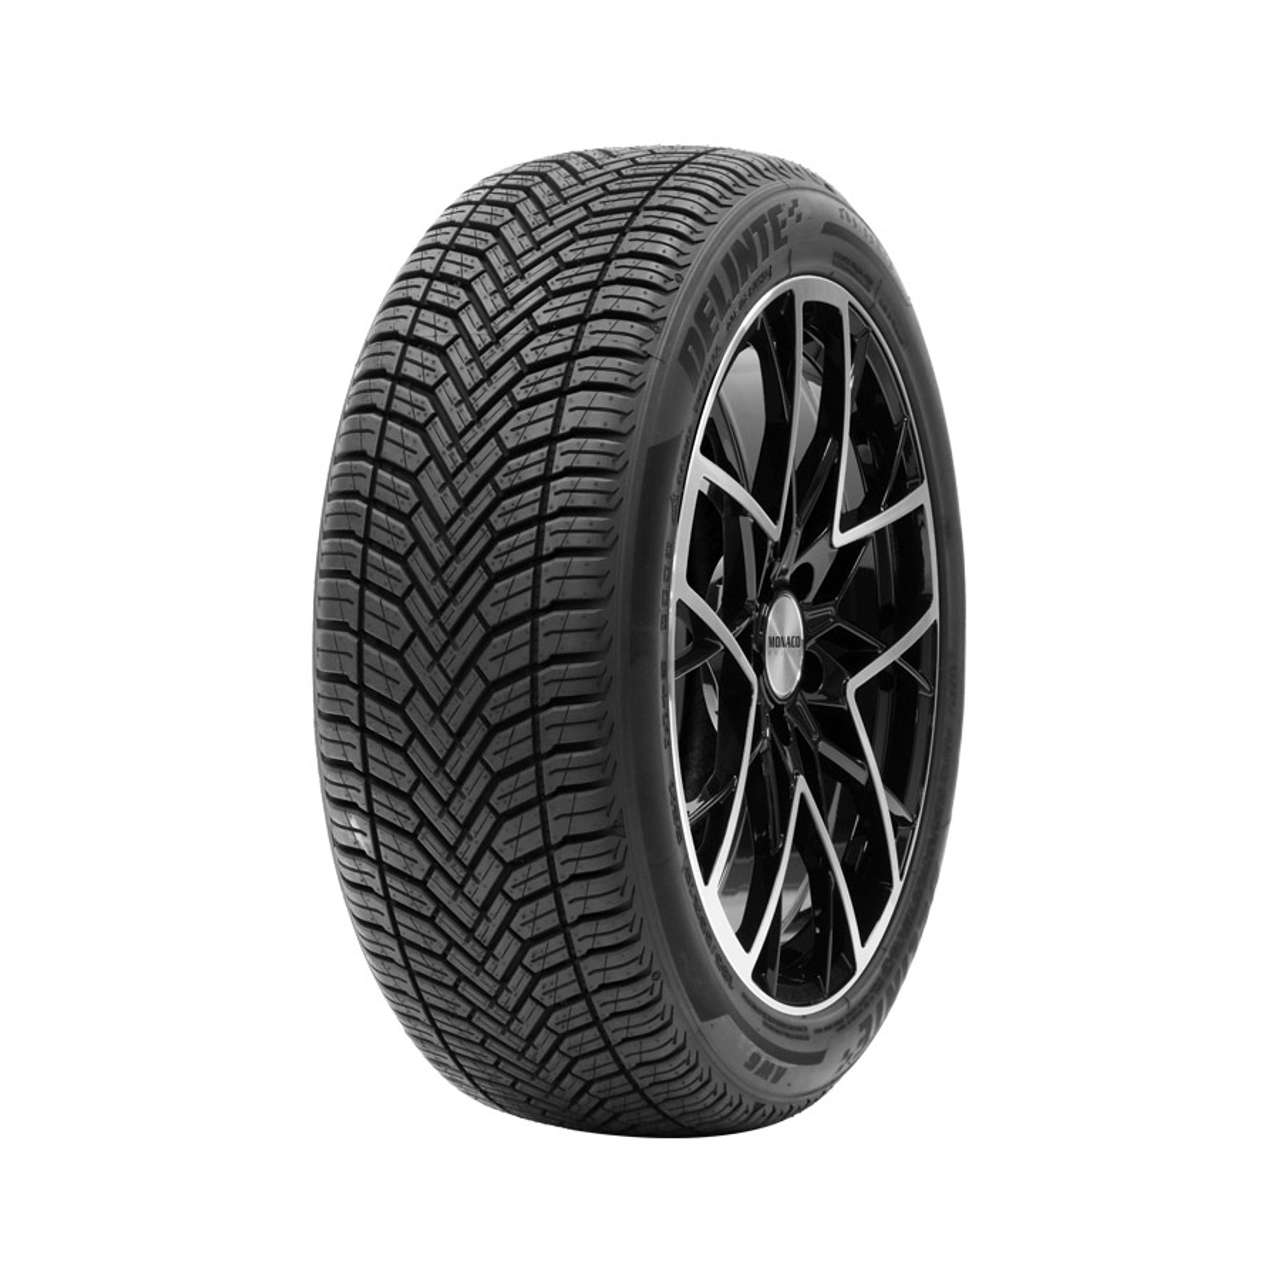 DELINTE AW6 195/65R15 91H BSW